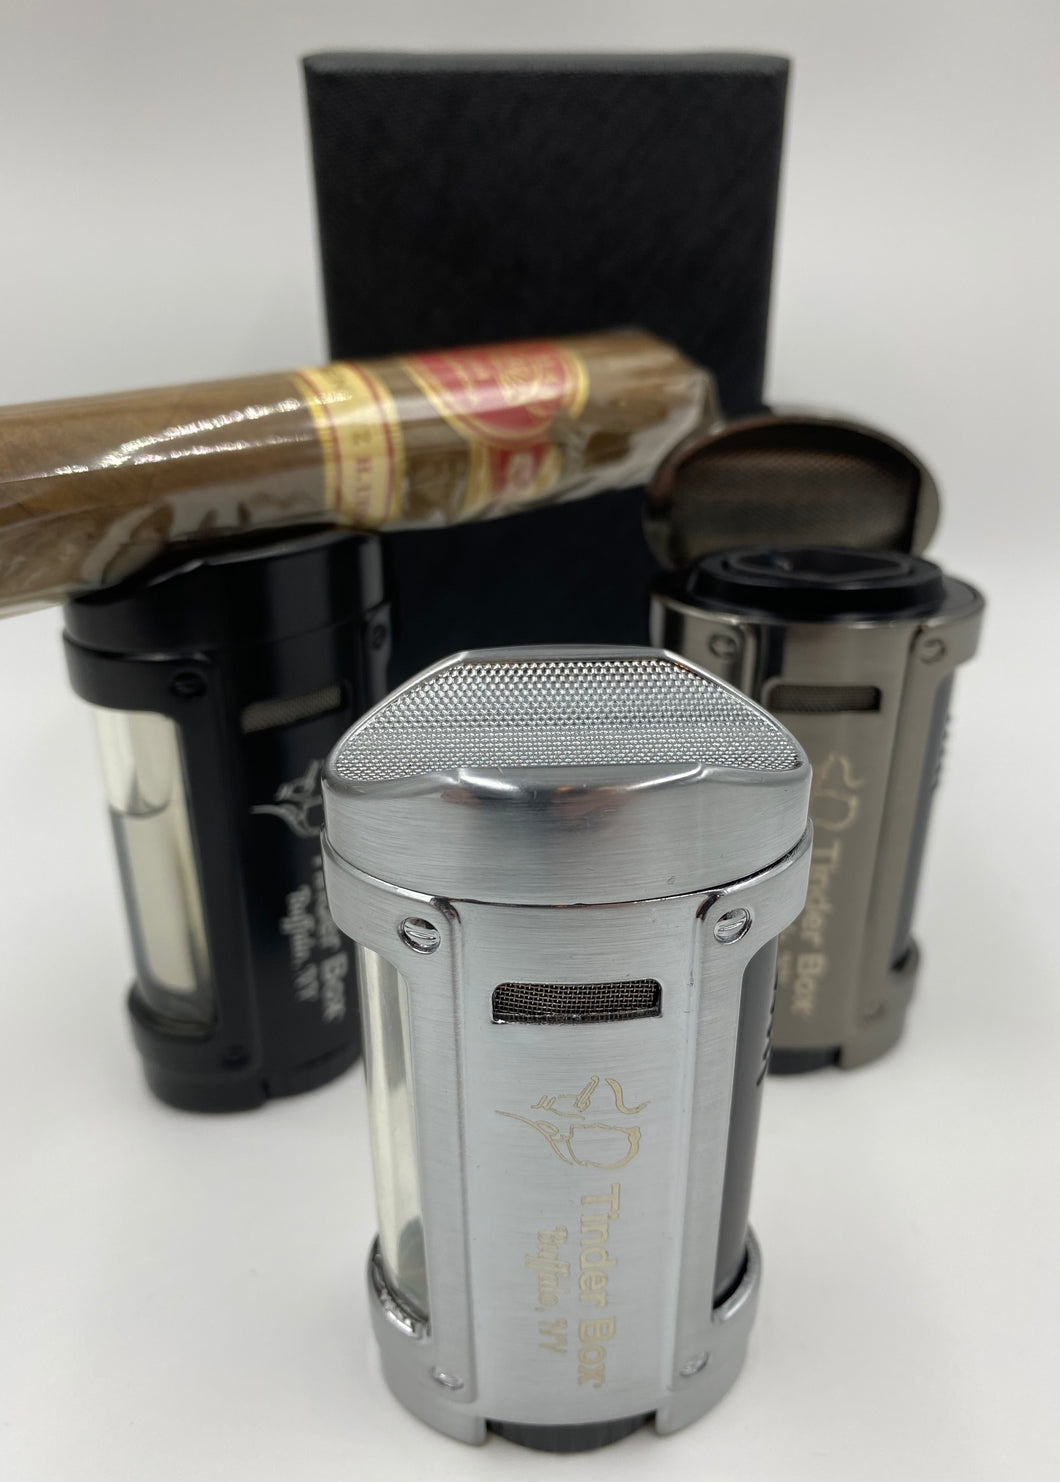 Tinder Box Buffalo 4-Flame Torch Lighter With Cigar Rest